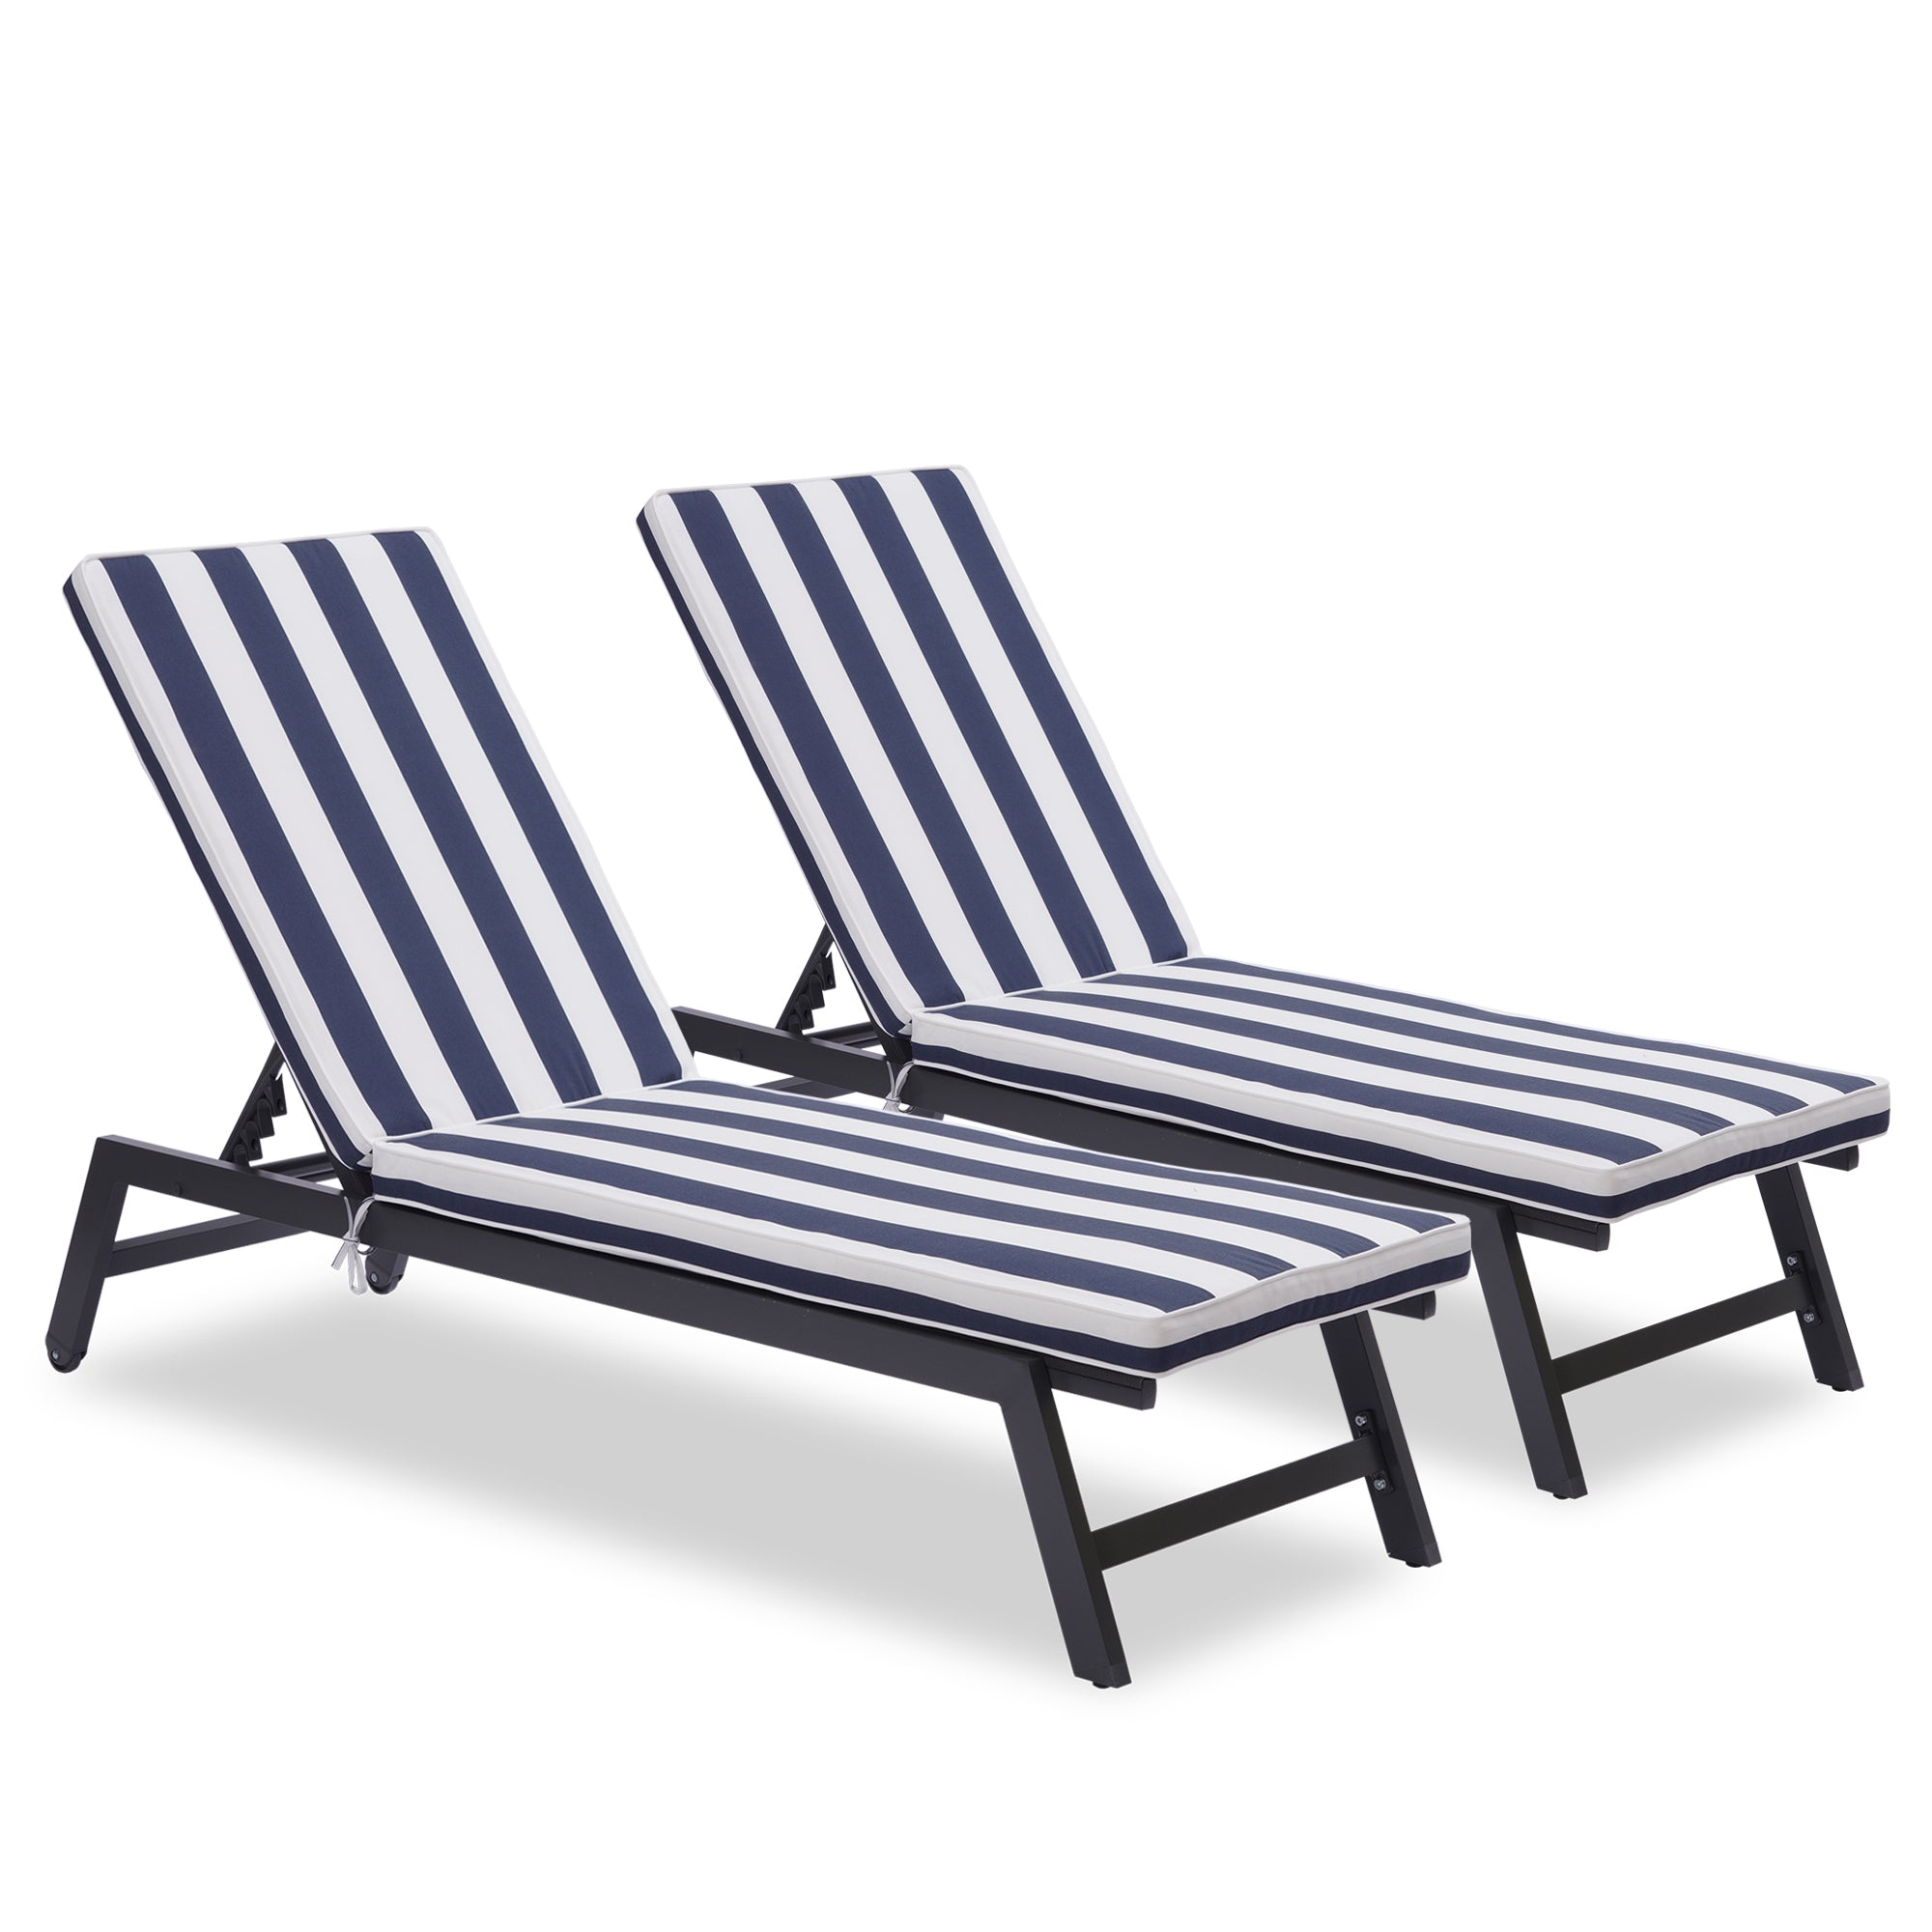 Outdoor Chaise Lounge Chair Set With Cushions, Five gray+ blue white stripes-aluminium